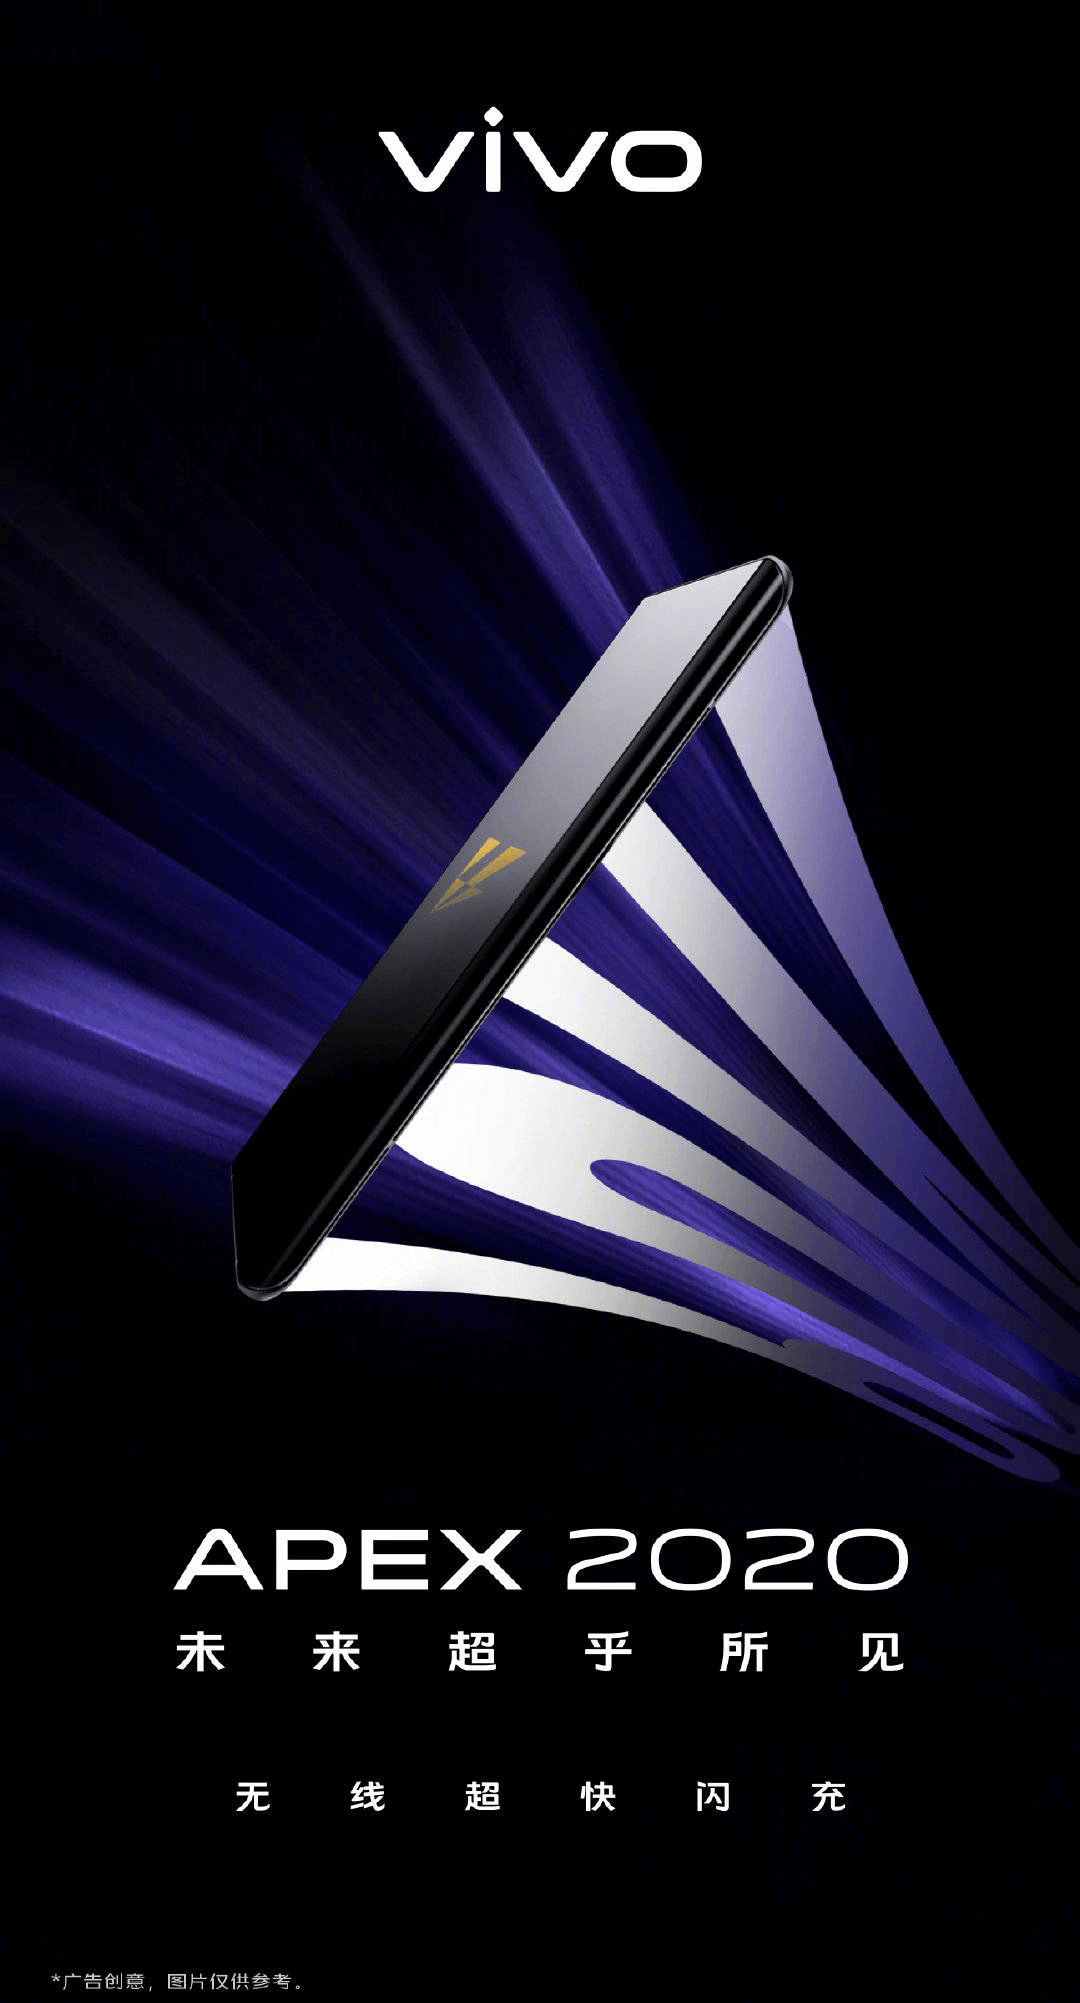 The Vivo Apex 2020 will have the best wireless charging on the market: 60 W